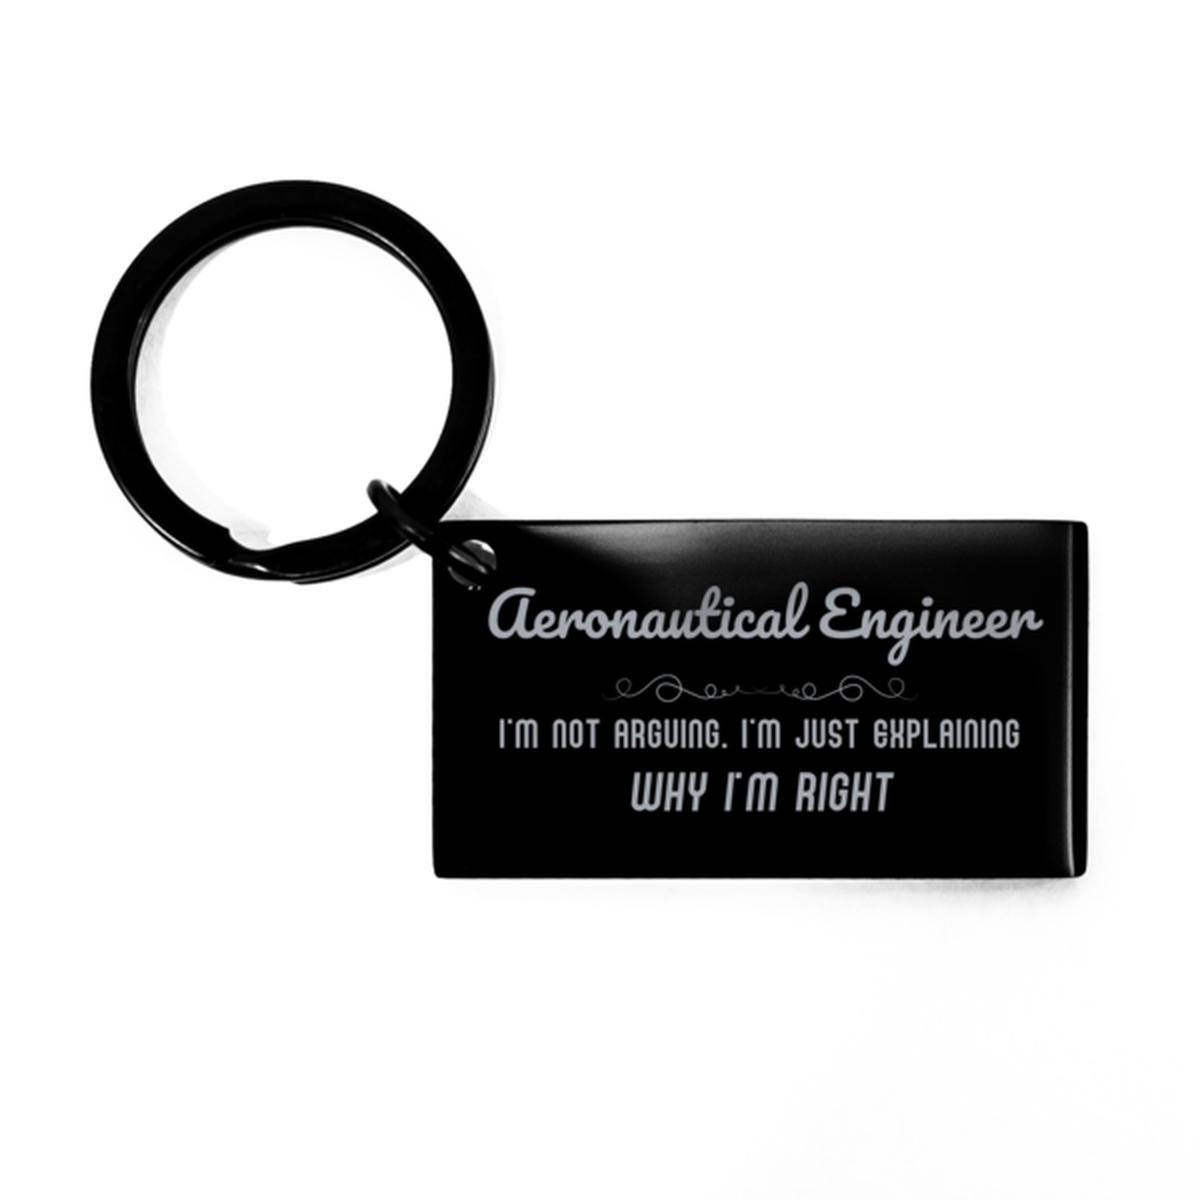 Aeronautical Engineer I'm not Arguing. I'm Just Explaining Why I'm RIGHT Keychain, Funny Saying Quote Aeronautical Engineer Gifts For Aeronautical Engineer Graduation Birthday Christmas Gifts for Men Women Coworker